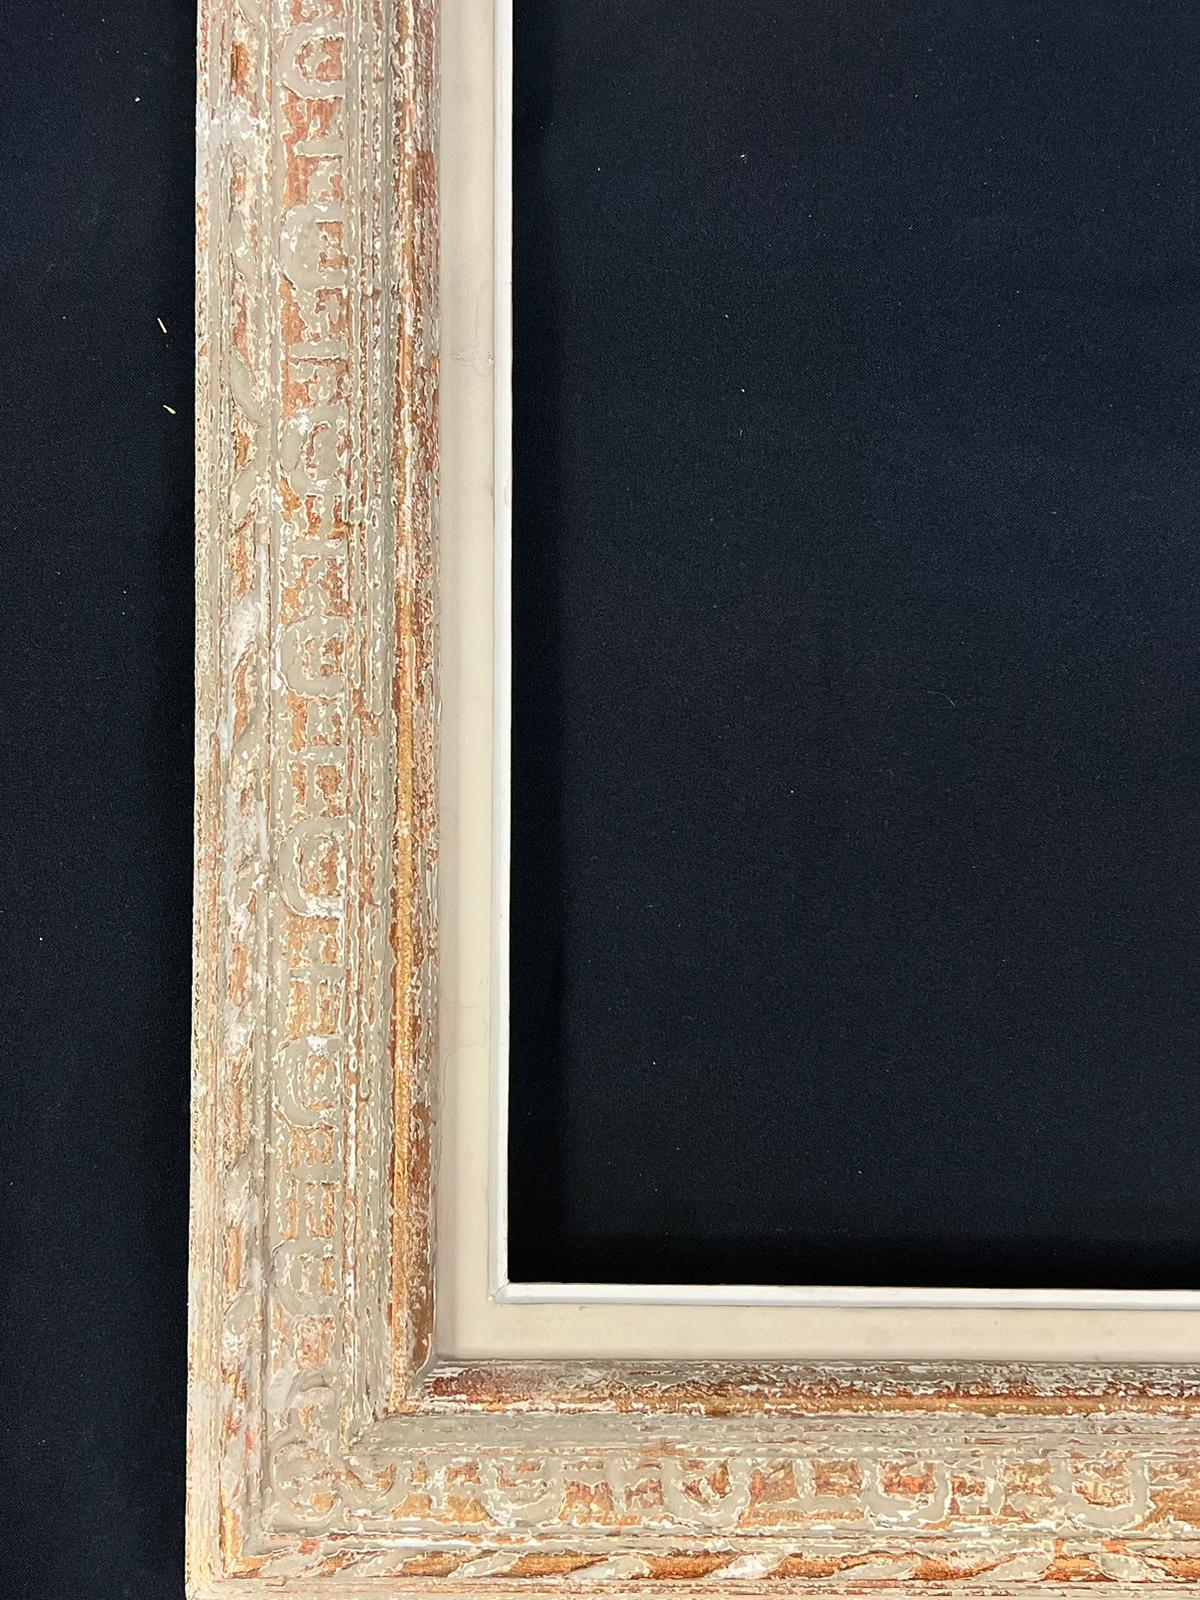 French mid 20th century
Montparnasse style picture frame
Wood and plaster 
Internal measurement (to house painting or mirror): 18 x 13 inches
Overal outer measurements: 24.5 x 19.5 inches
Provenance: from a collection in Paris
Condition: all old